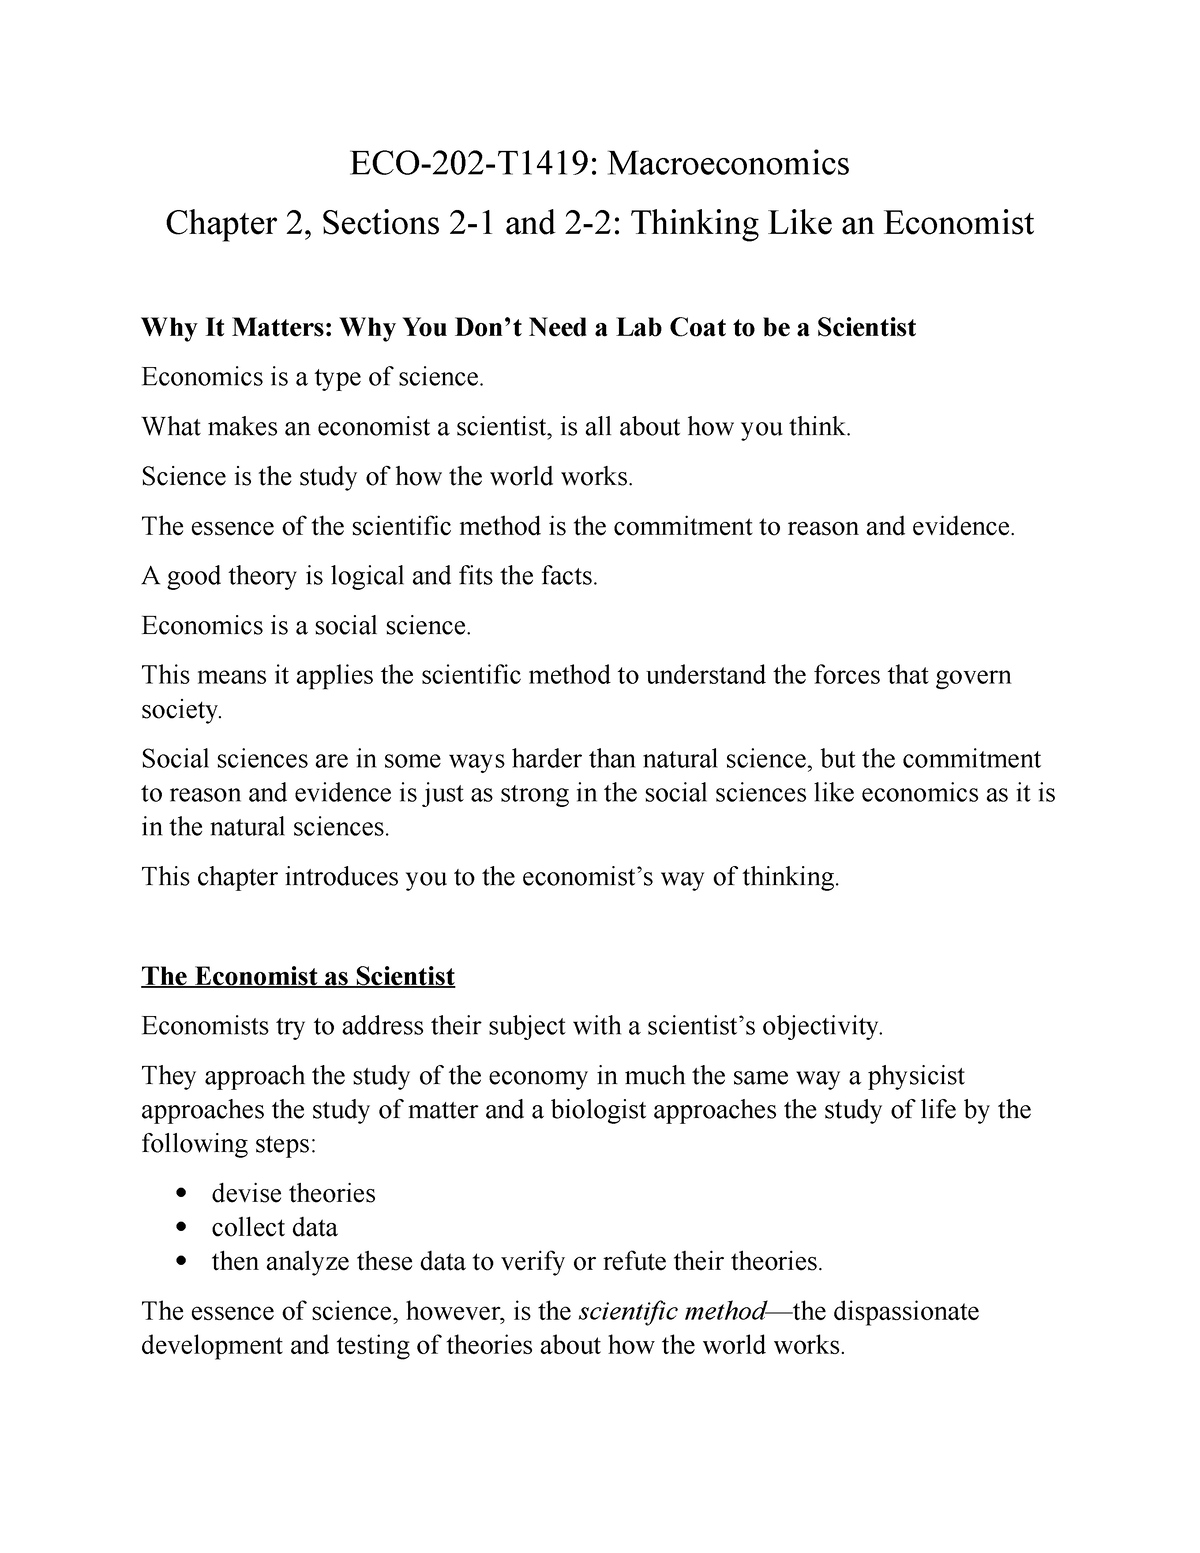 ECO202 Chapter 2, Sections 21 and 22 Thinking Like an Economist